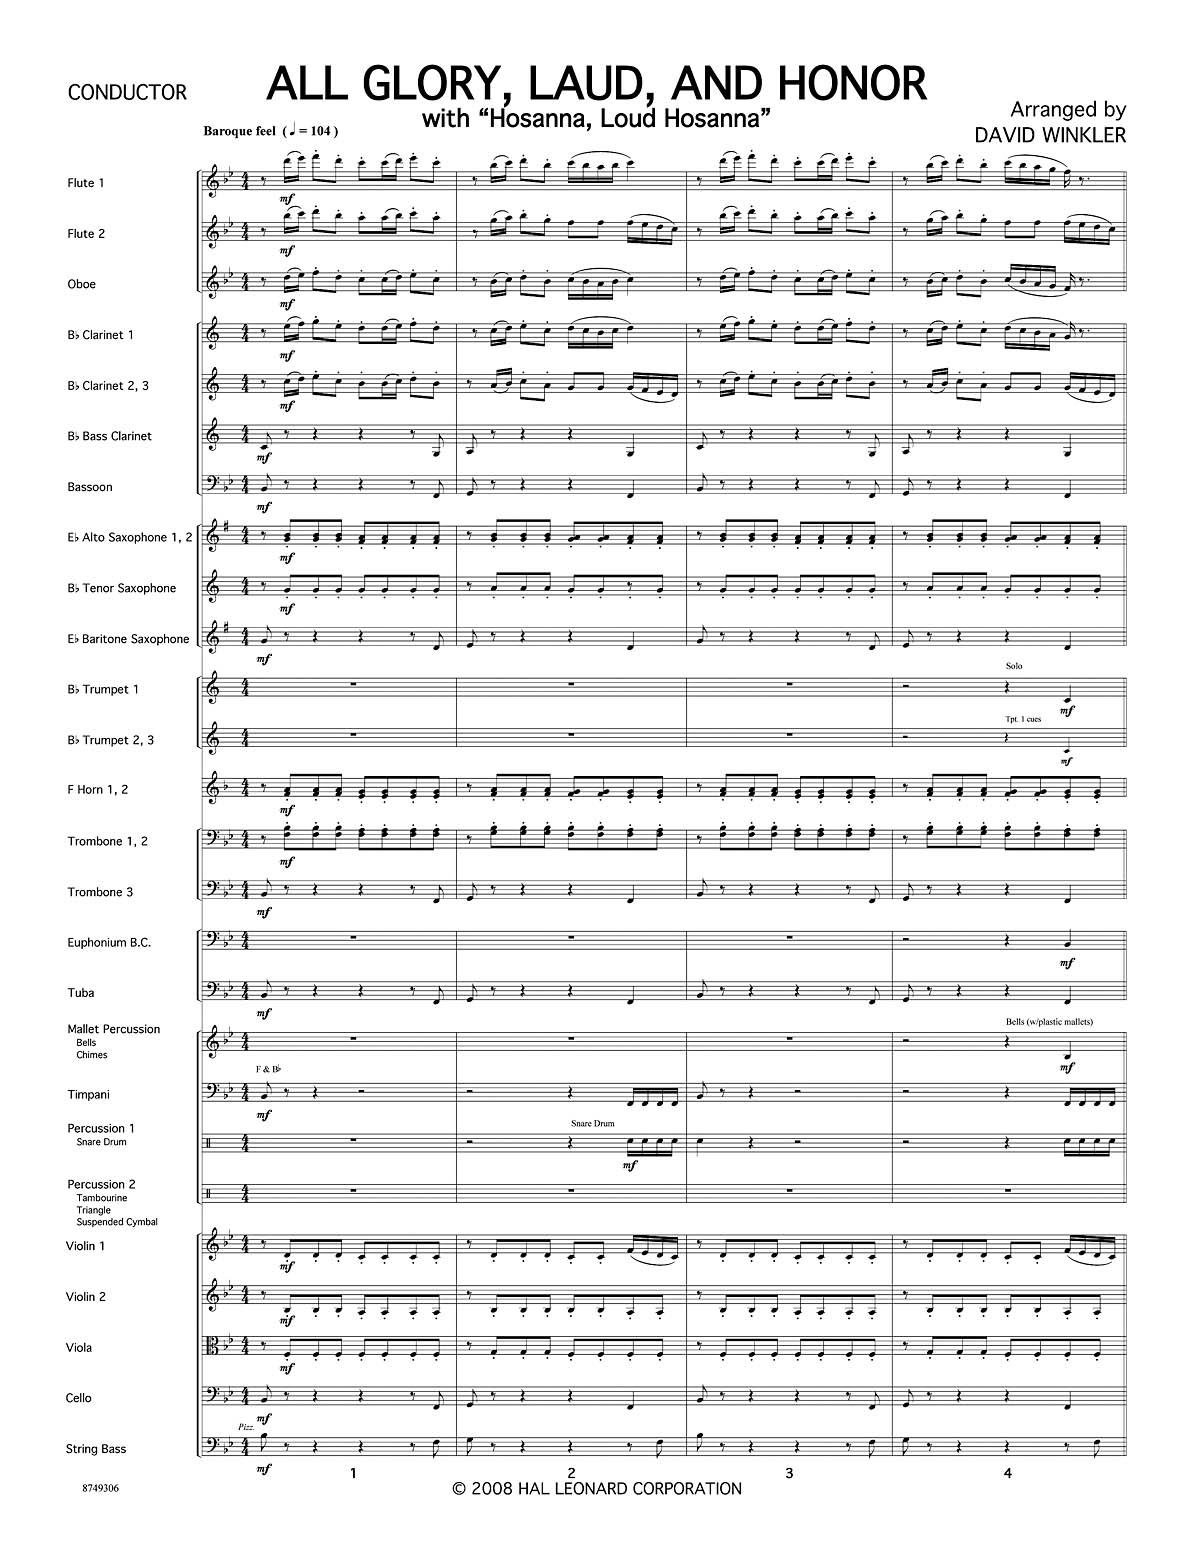 All Glory  Laud  and Honor: Orchestra: Score & Parts